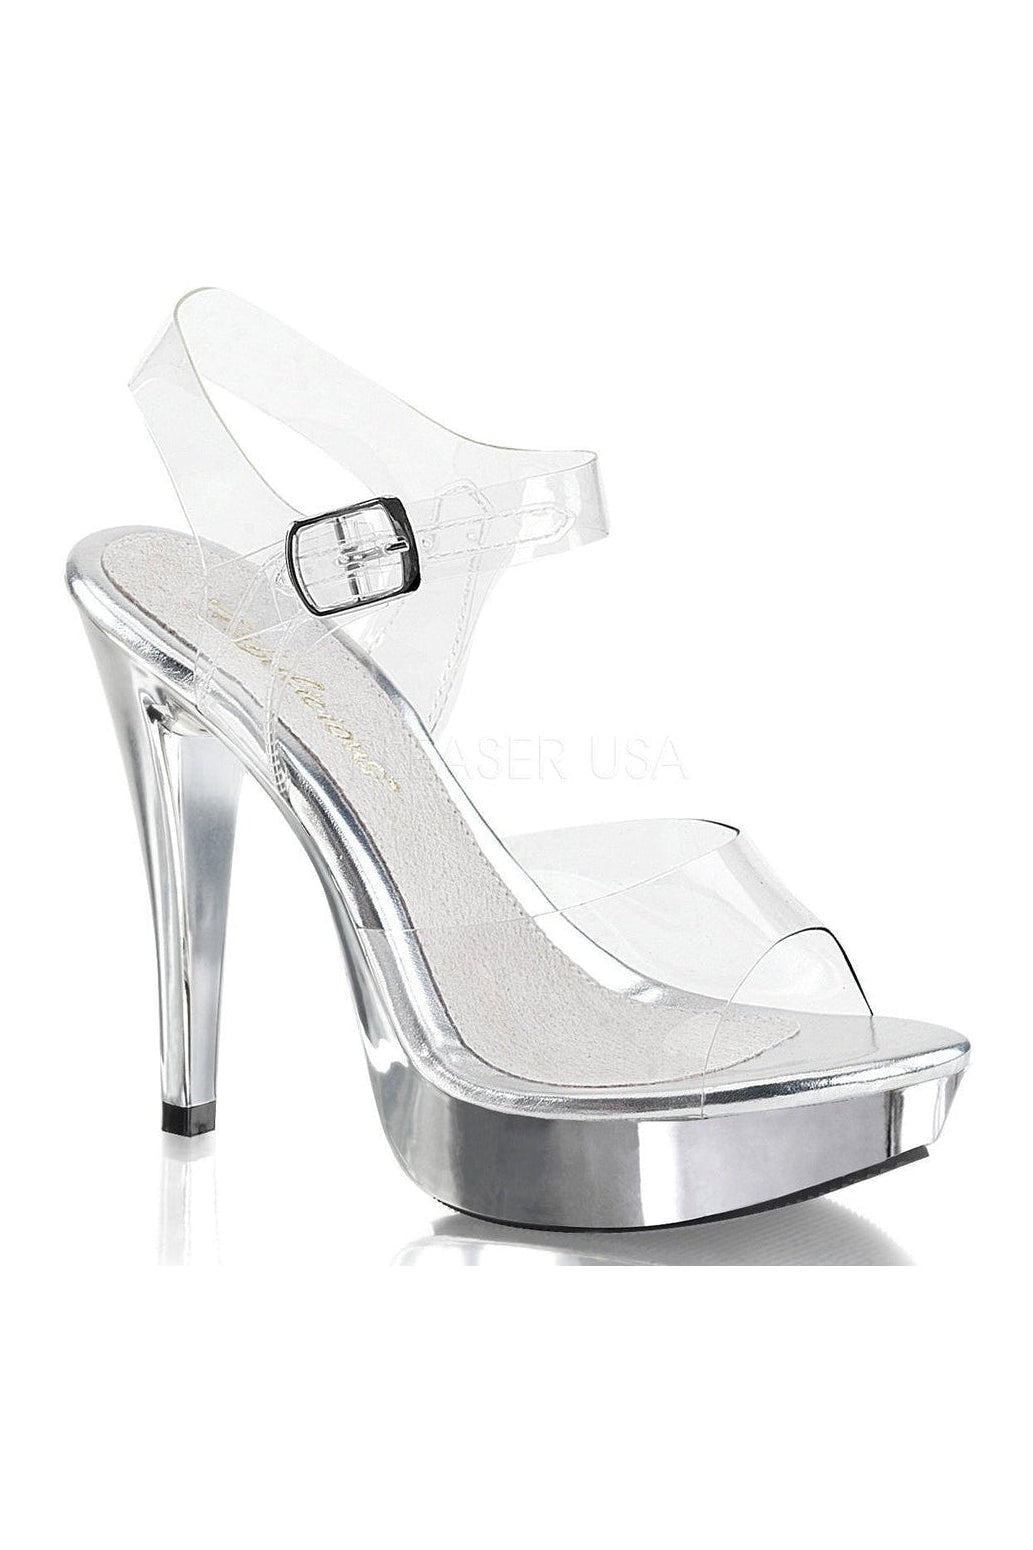 COCKTAIL-508 Sandal | Clear Vinyl-Fabulicious-Clear-Sandals-SEXYSHOES.COM